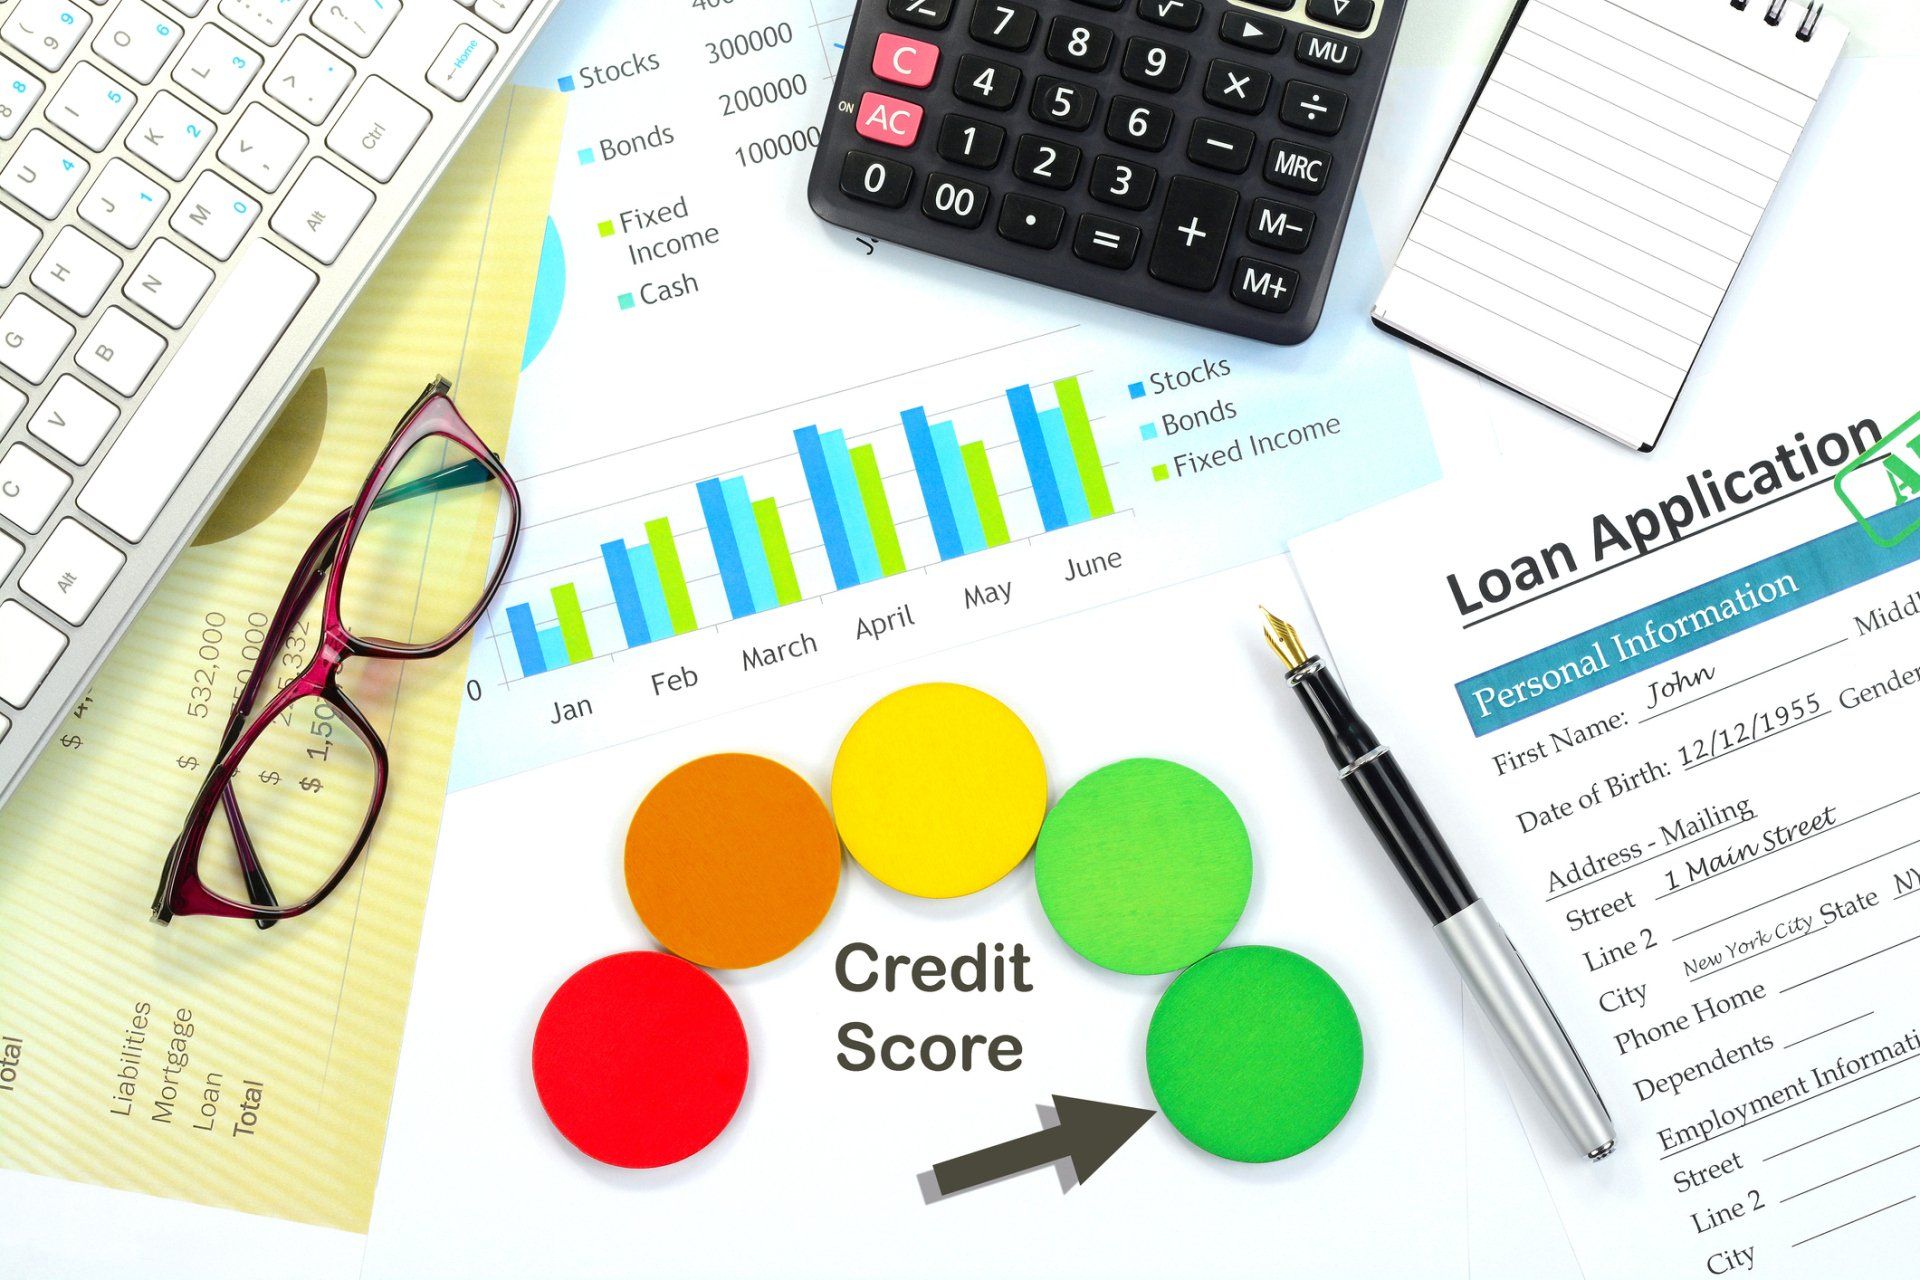 Credit Score Report With Financial Reports And Loan Application - Albuquerque, NM - Credit Rescue Inc.